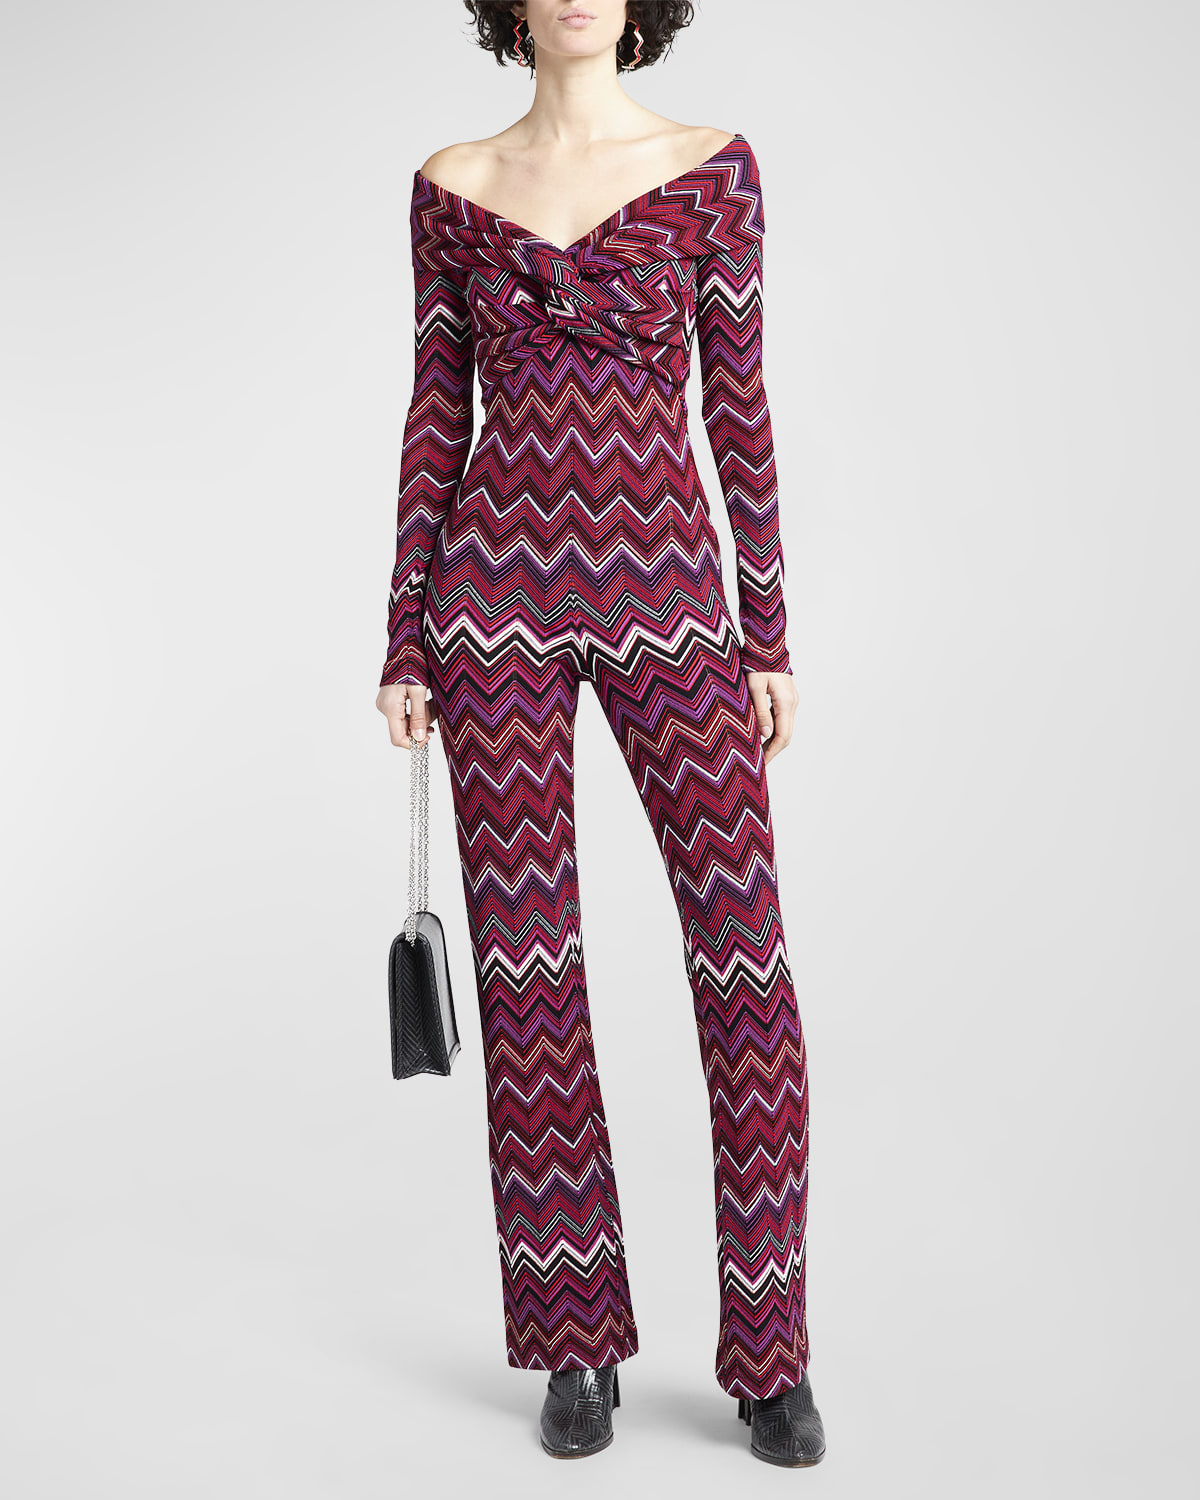 MISSONI TWISTED OFF-THE-SHOULDER CHEVRON KNIT BOOTCUT JUMPSUIT